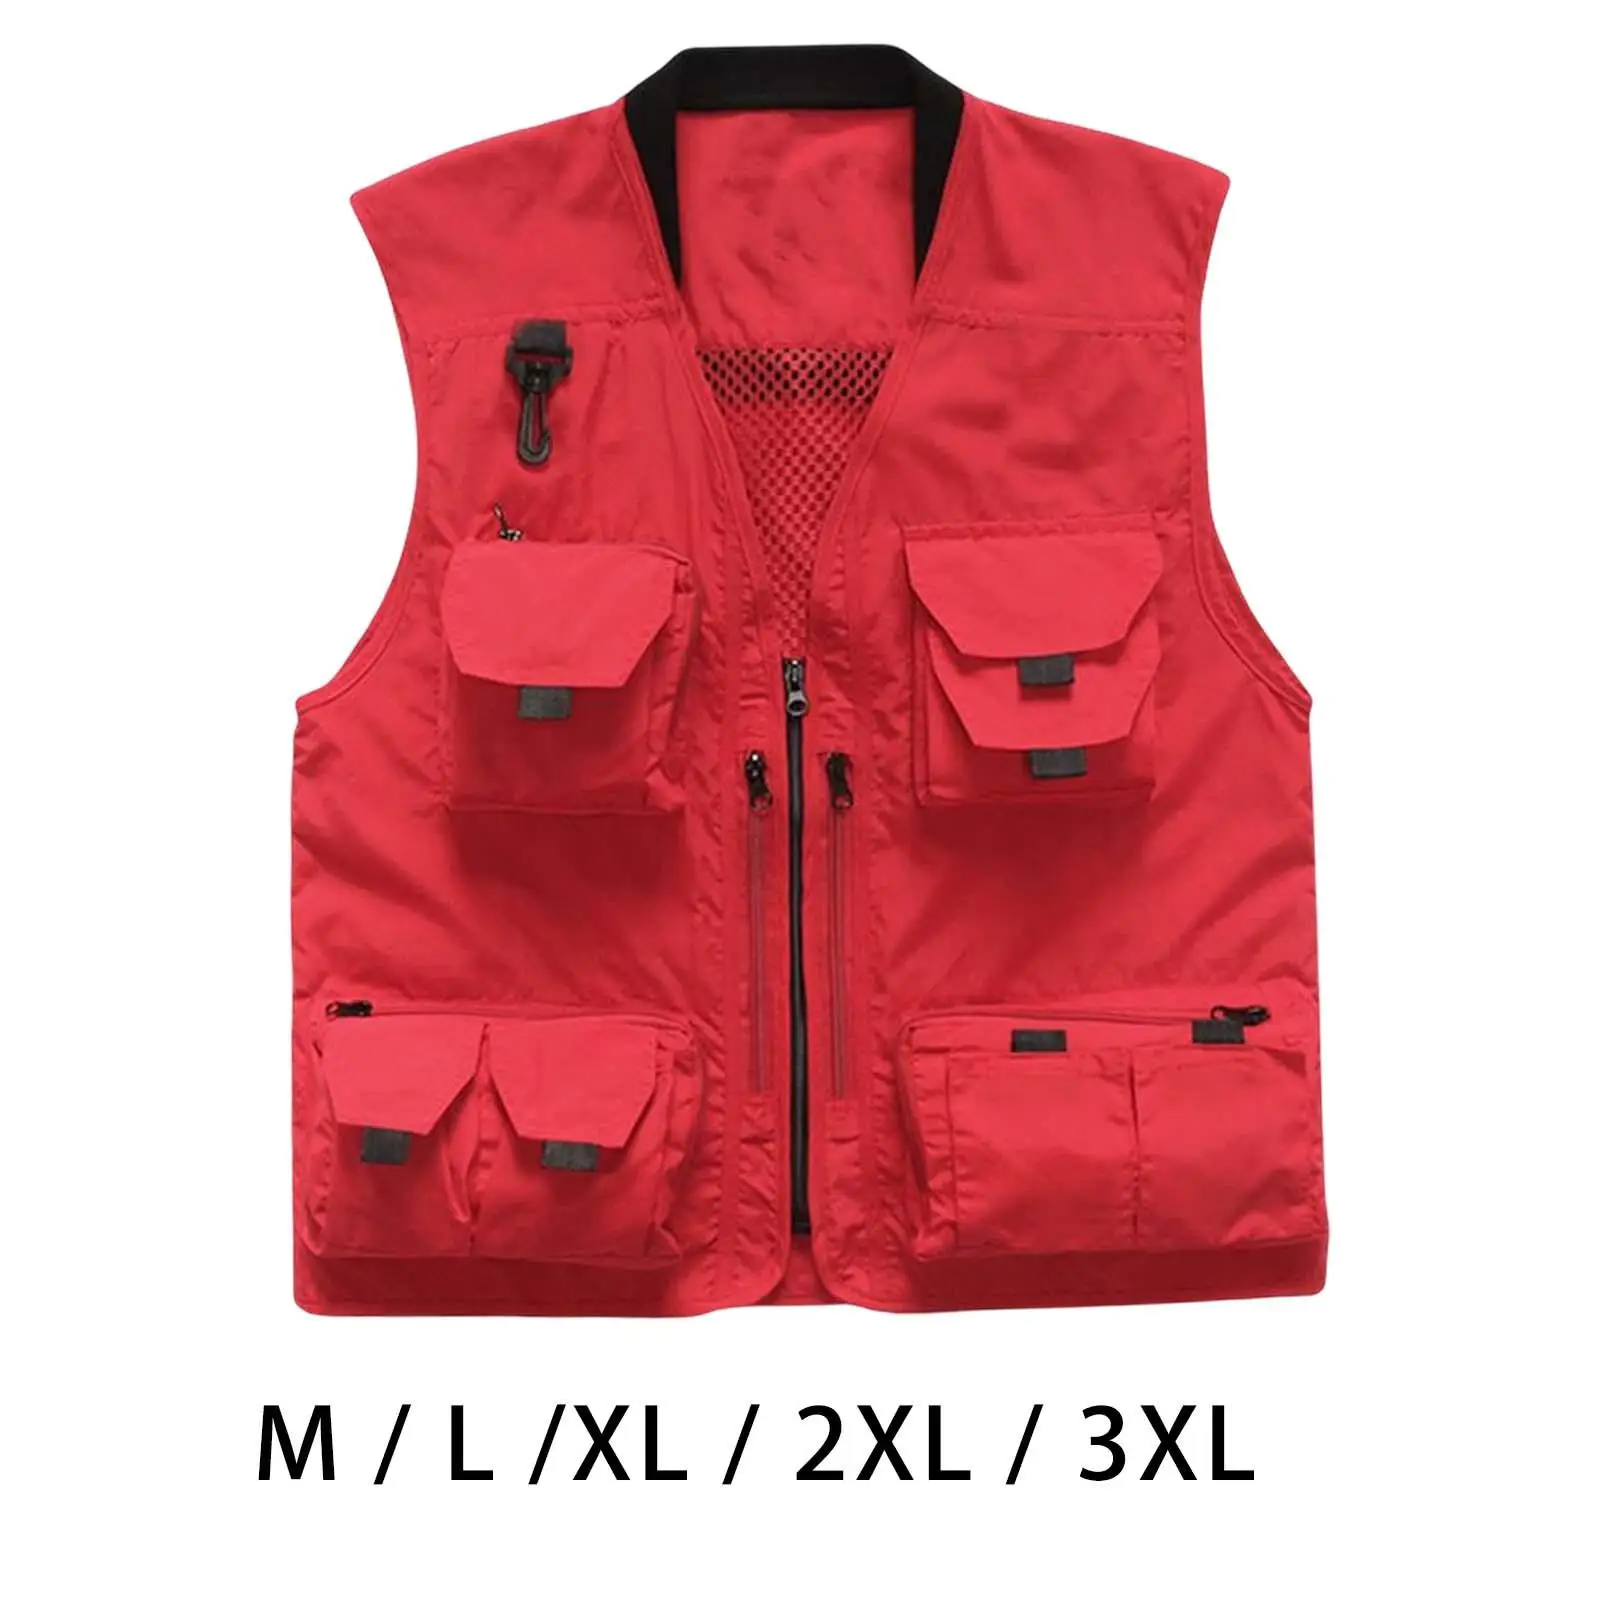 Men Fishing Vest Waistcoat Fishermen with Multi Pockets Zipper Clothing Modern Jacket for Outdoor Hiking Work Camping Travel